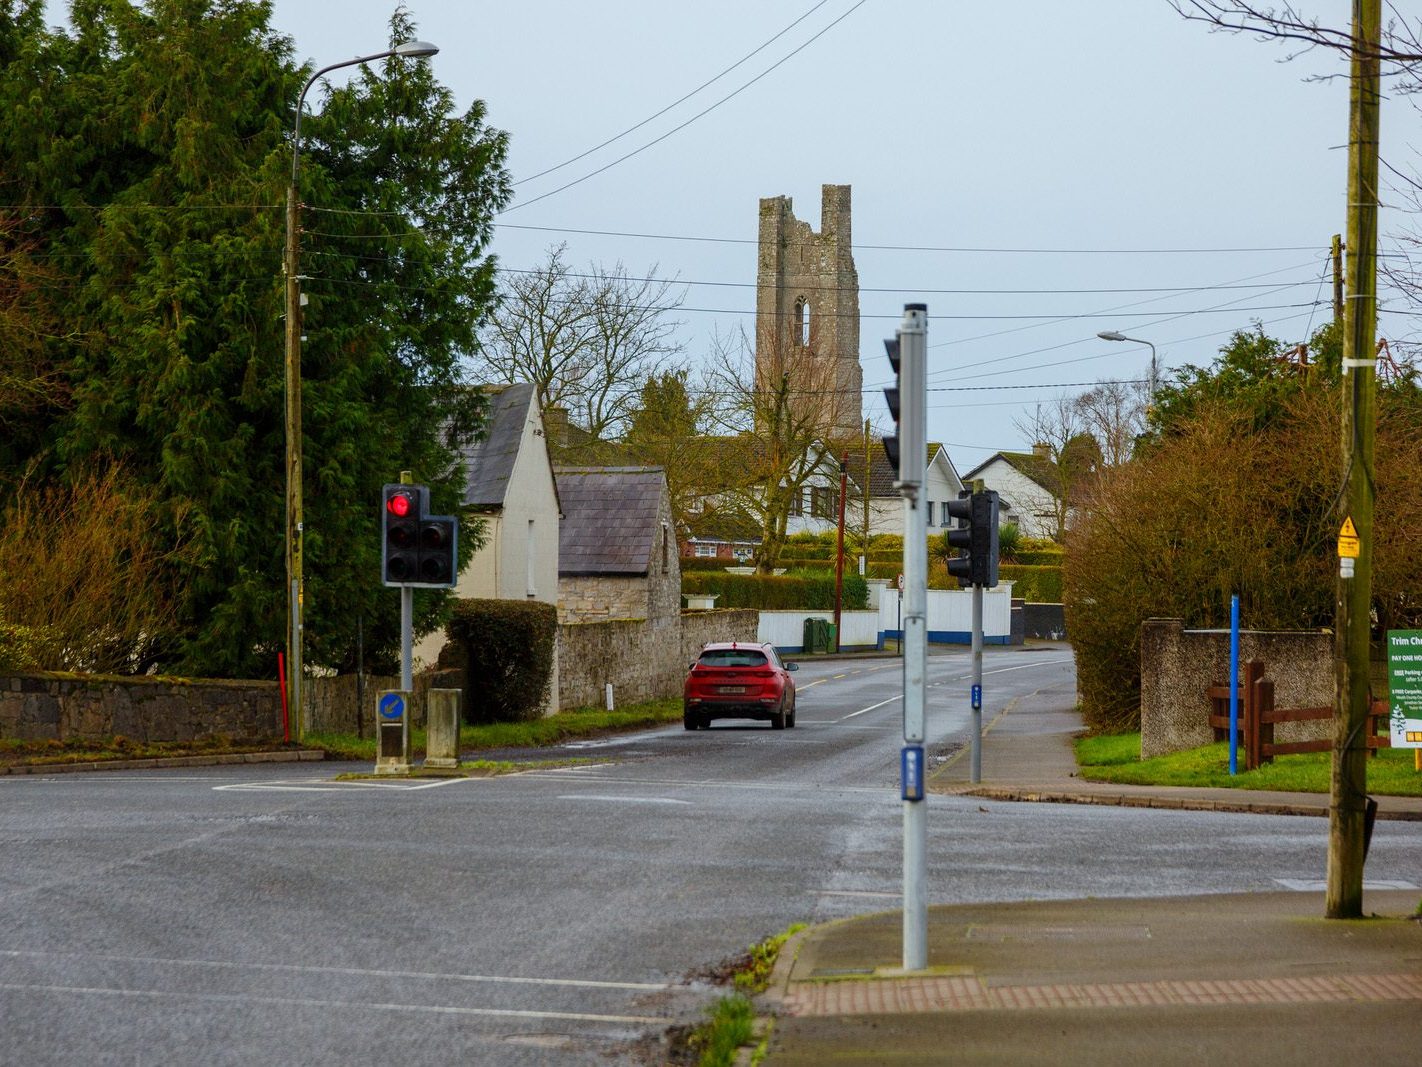 THE YELLOW STEEPLE DOMINATES THE TOWN OF TRIM [ALSO KNOWN AS ST MARYS ABBEY]-226756-1